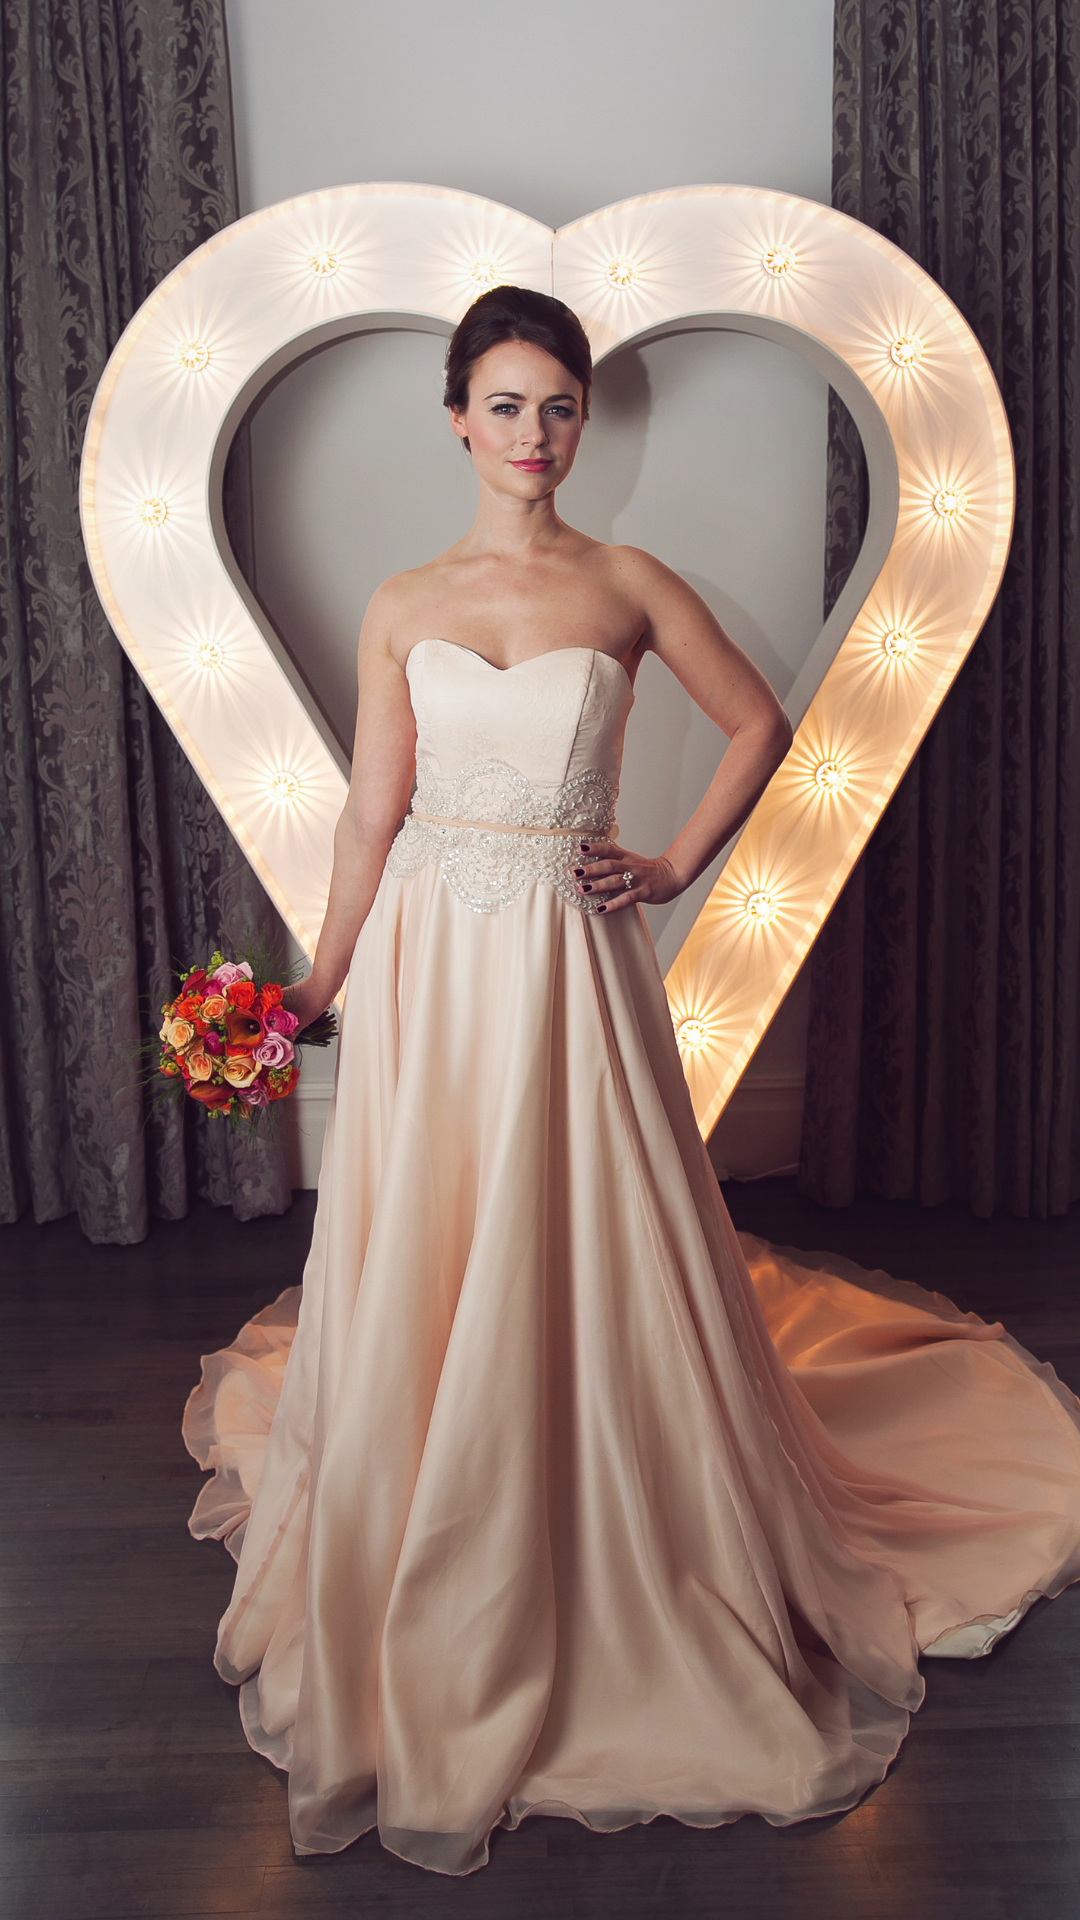 Mia // Blush georgette wedding dress with beaded detailing